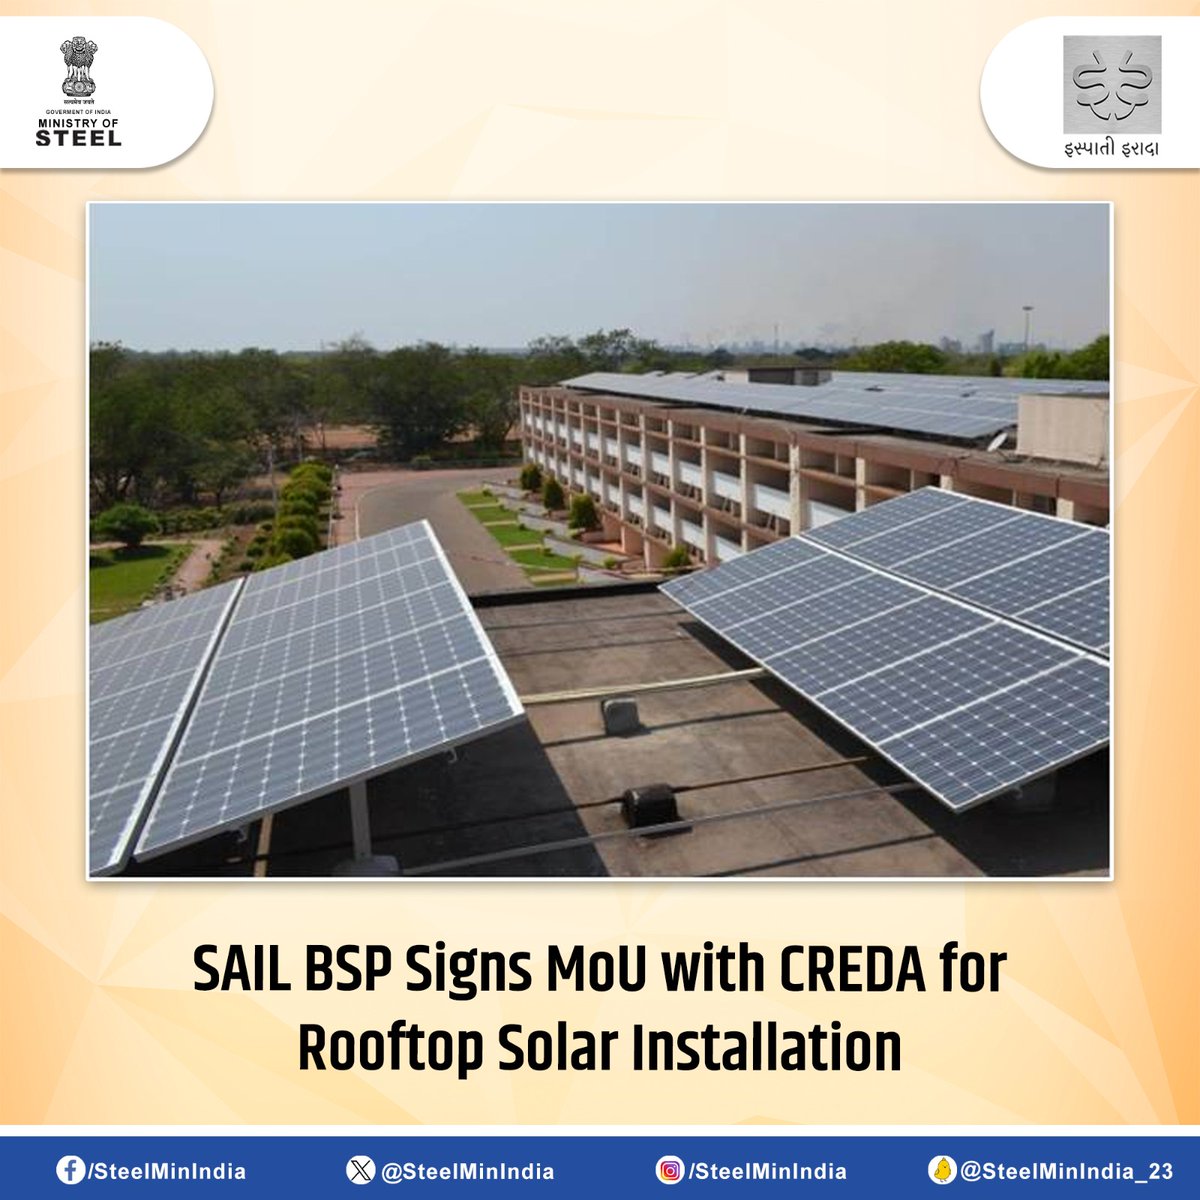 #SAIL #BSP partners with #CREDA to install rooftop solar panels, generating 2 MW at the plant and proposing an additional 3 MW across township buildings. This initiative aims to cut CO2 emissions by 8000 T annually.